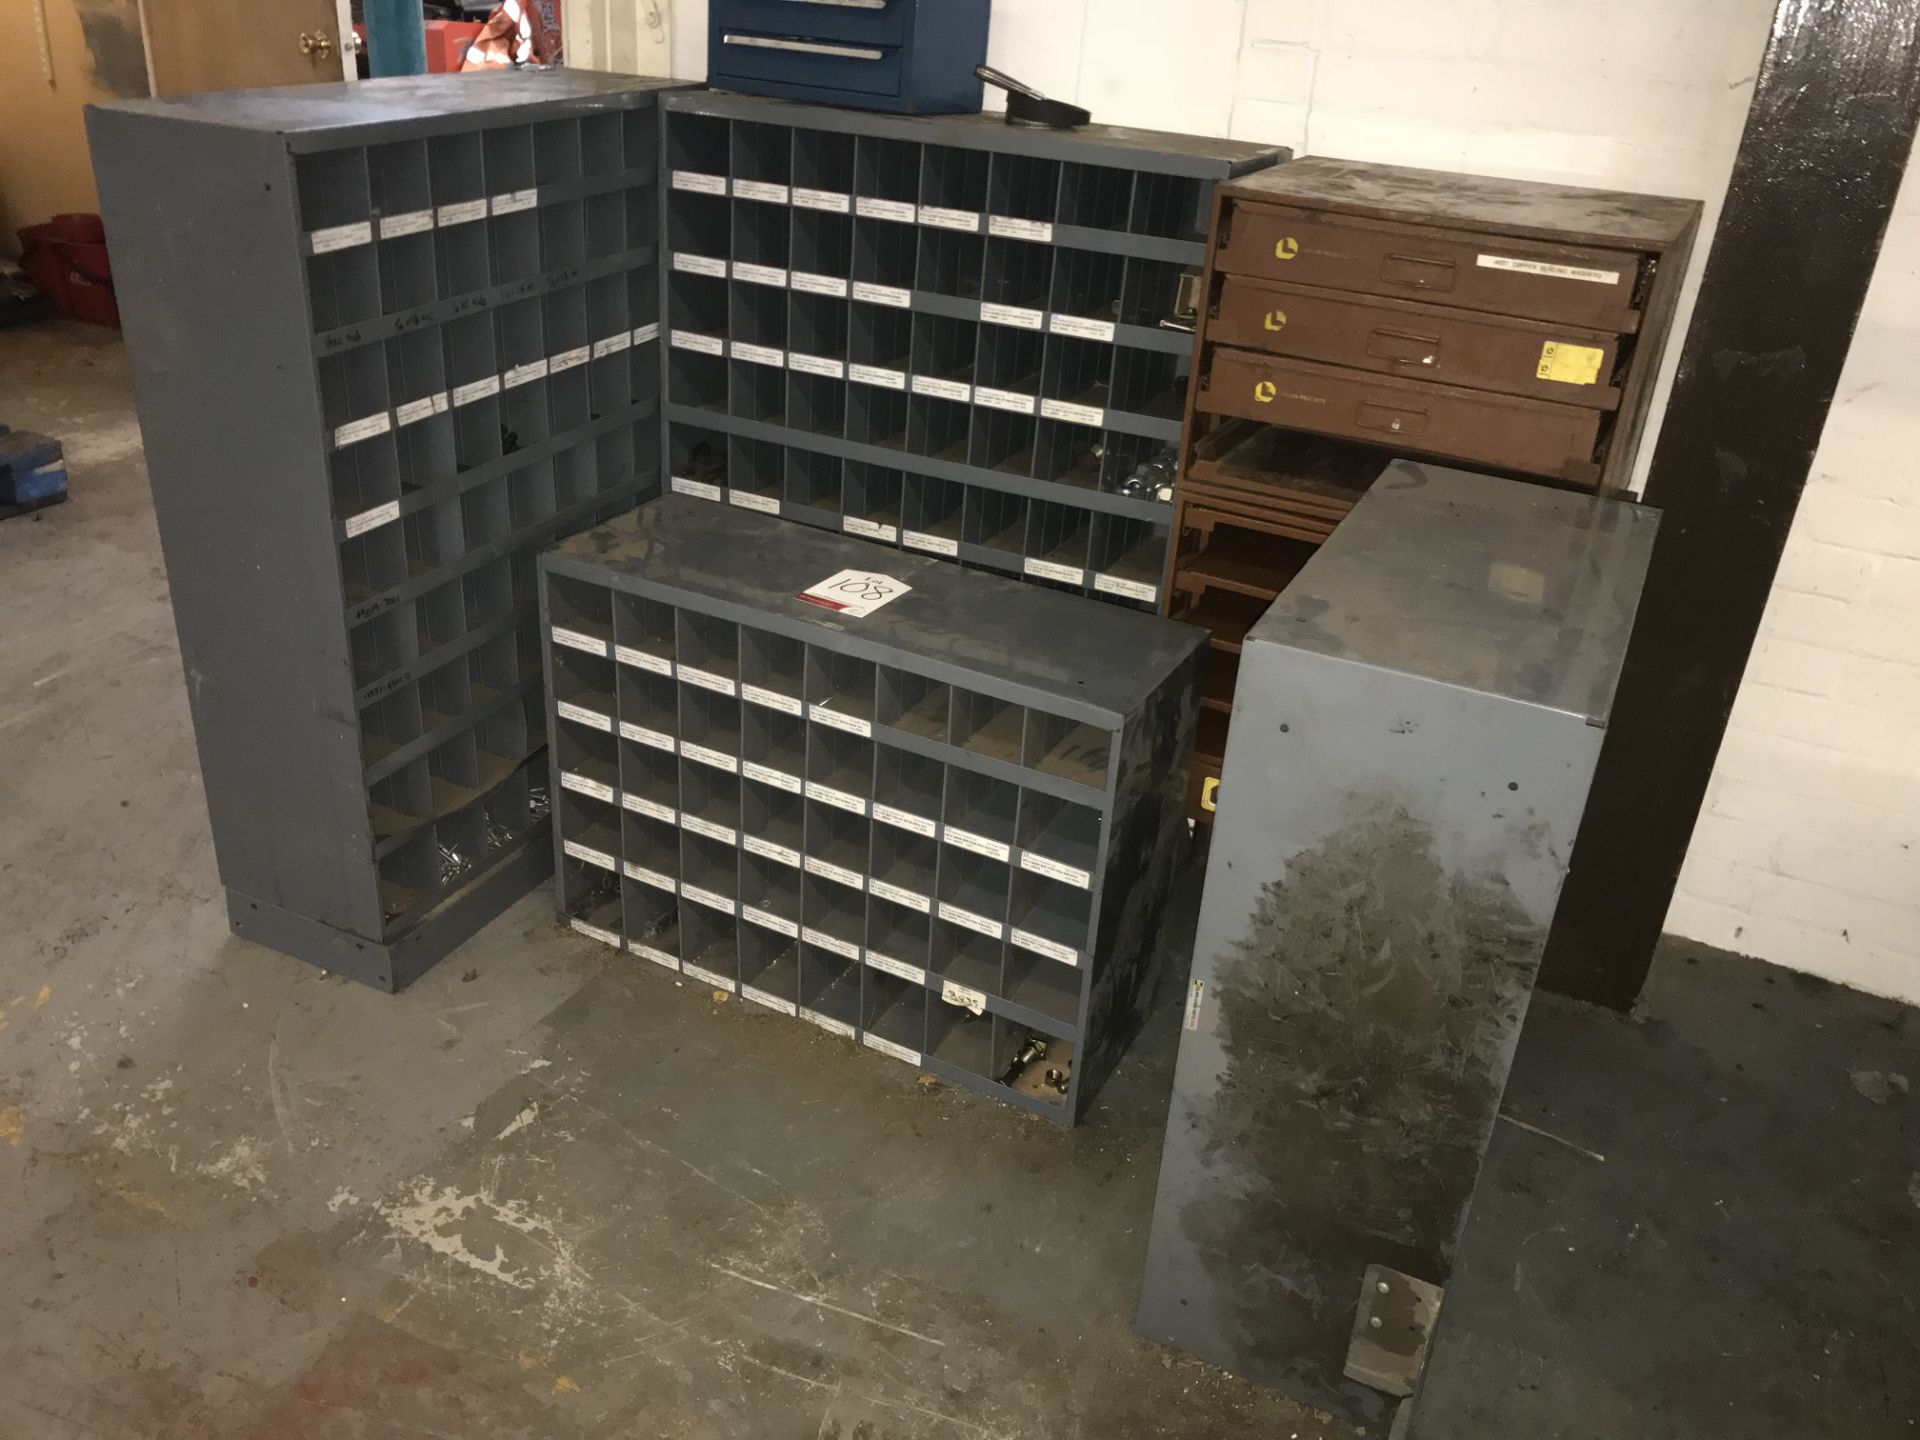 Quantity of Various Pigeon Hole Storage Bin Units & Workshop Drawer Units & Contents - Image 2 of 2